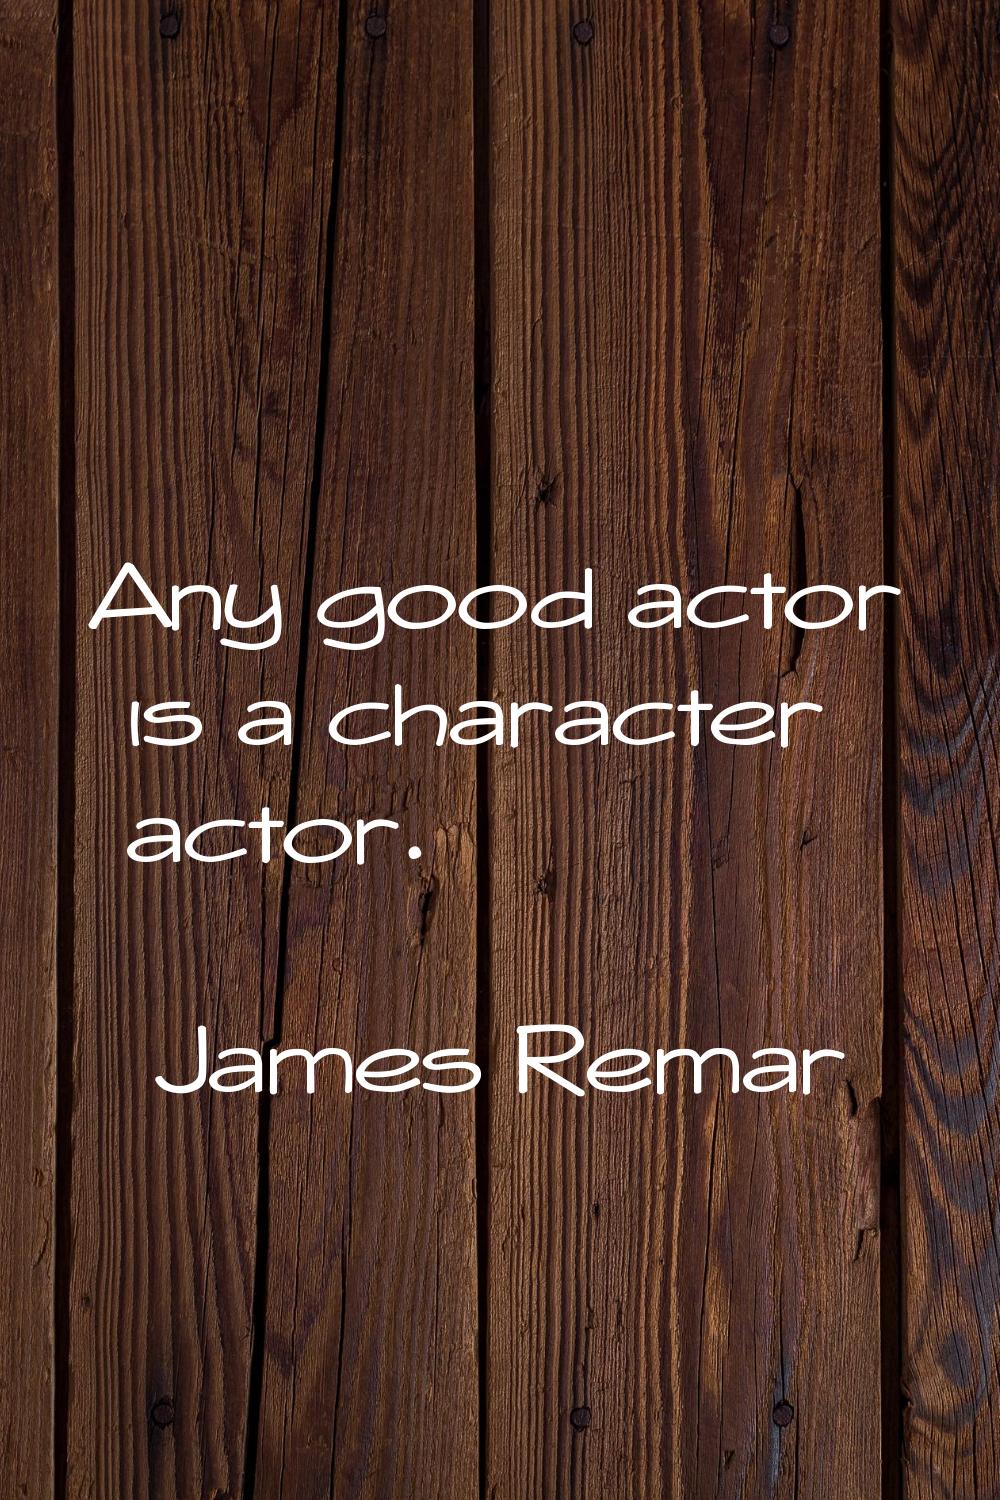 Any good actor is a character actor.